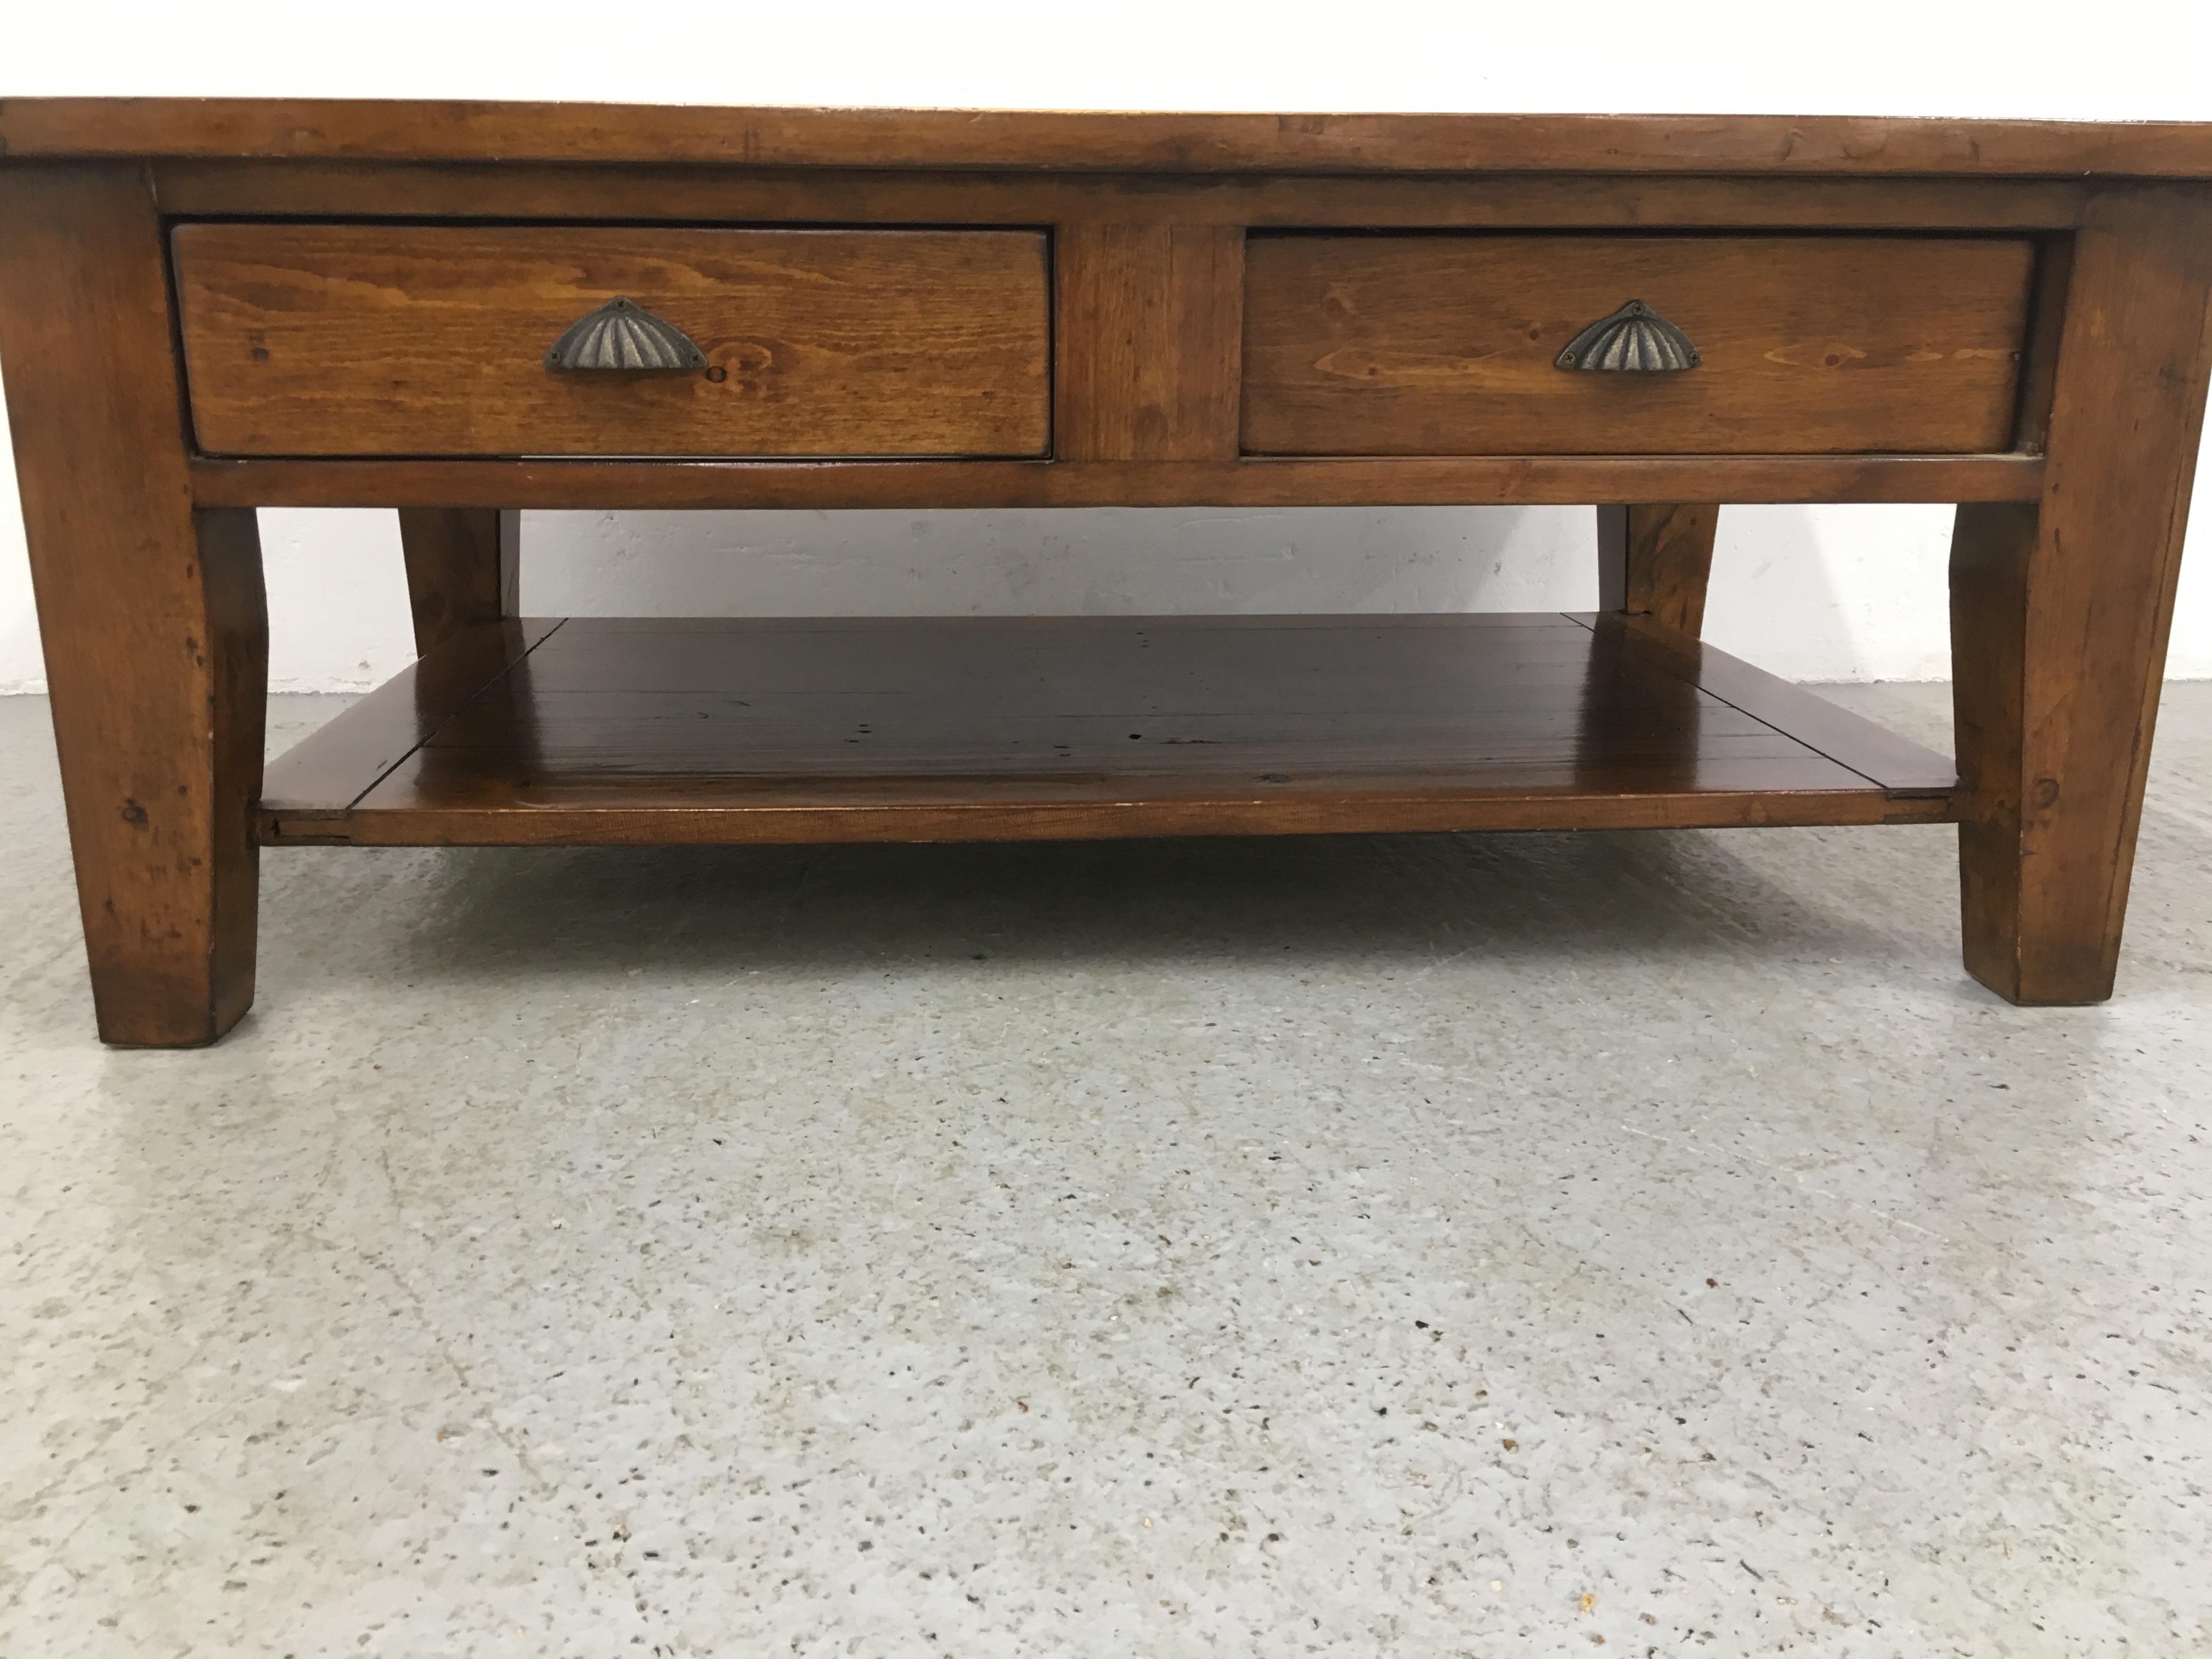 MODERN HARDWOOD TWO DRAWER COFFEE TABLE WITH CUP HANDLES - Image 8 of 8